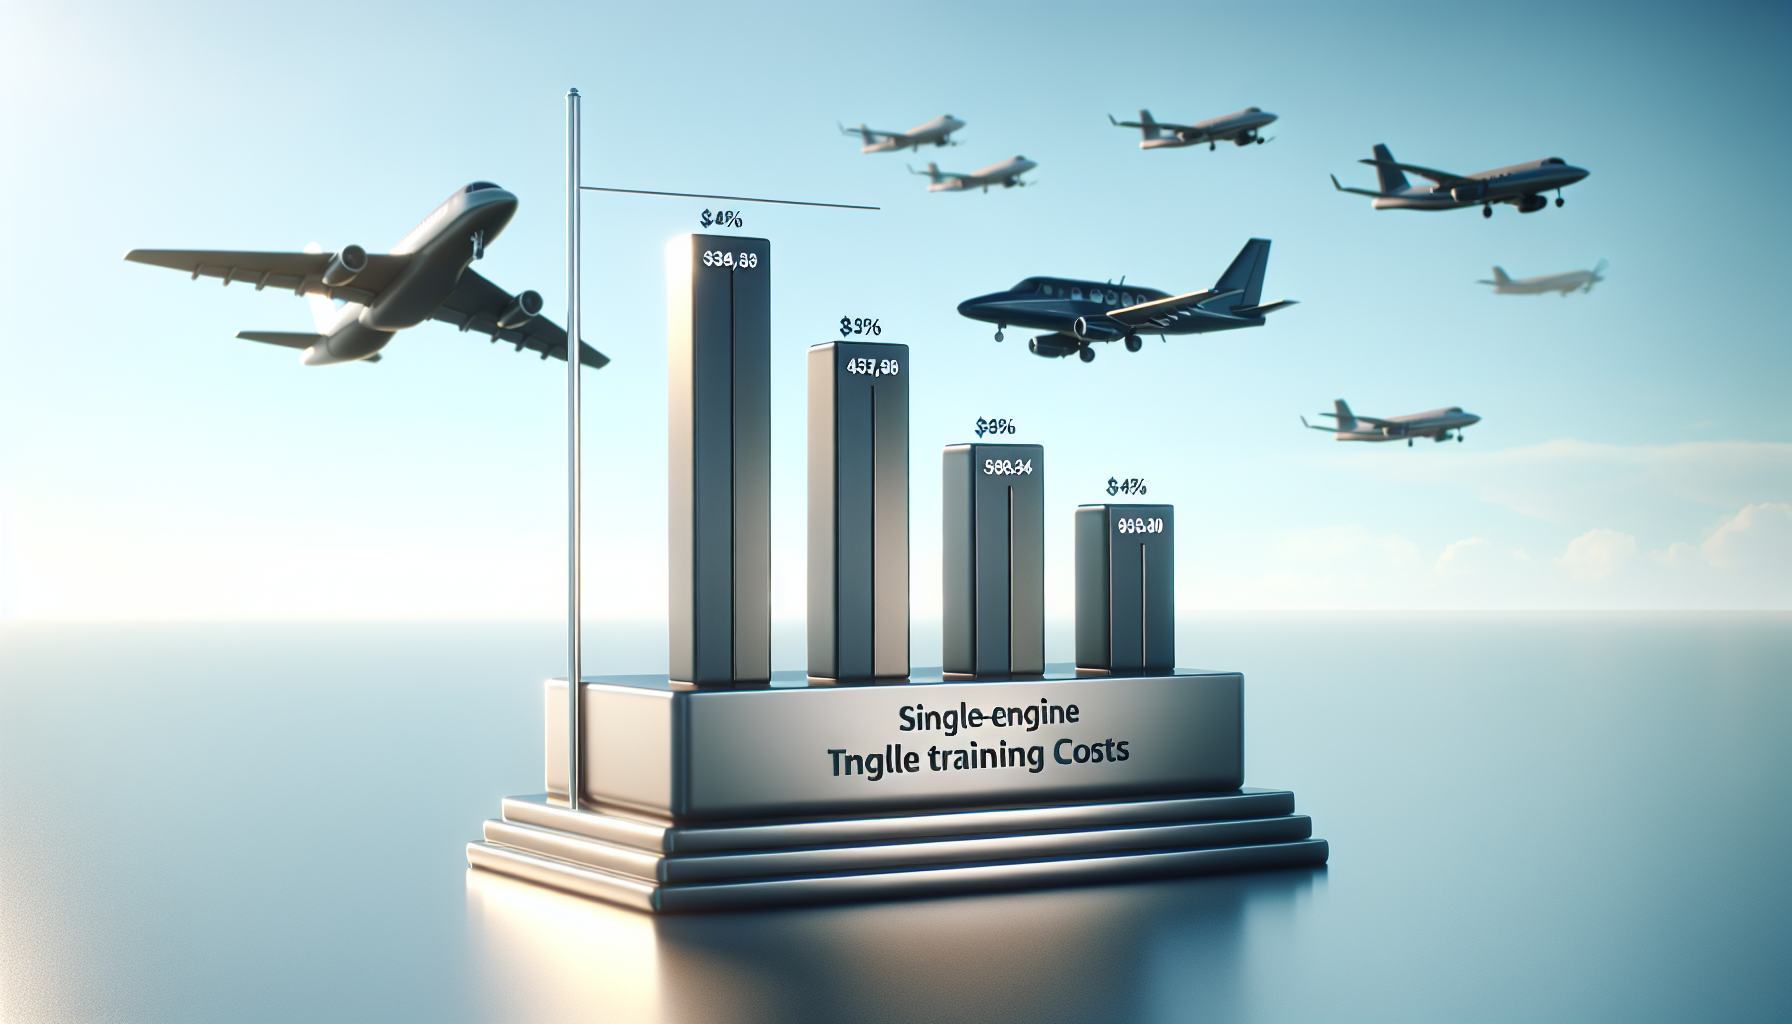 A comparison chart showing the costs of single engine vs. multi engine training